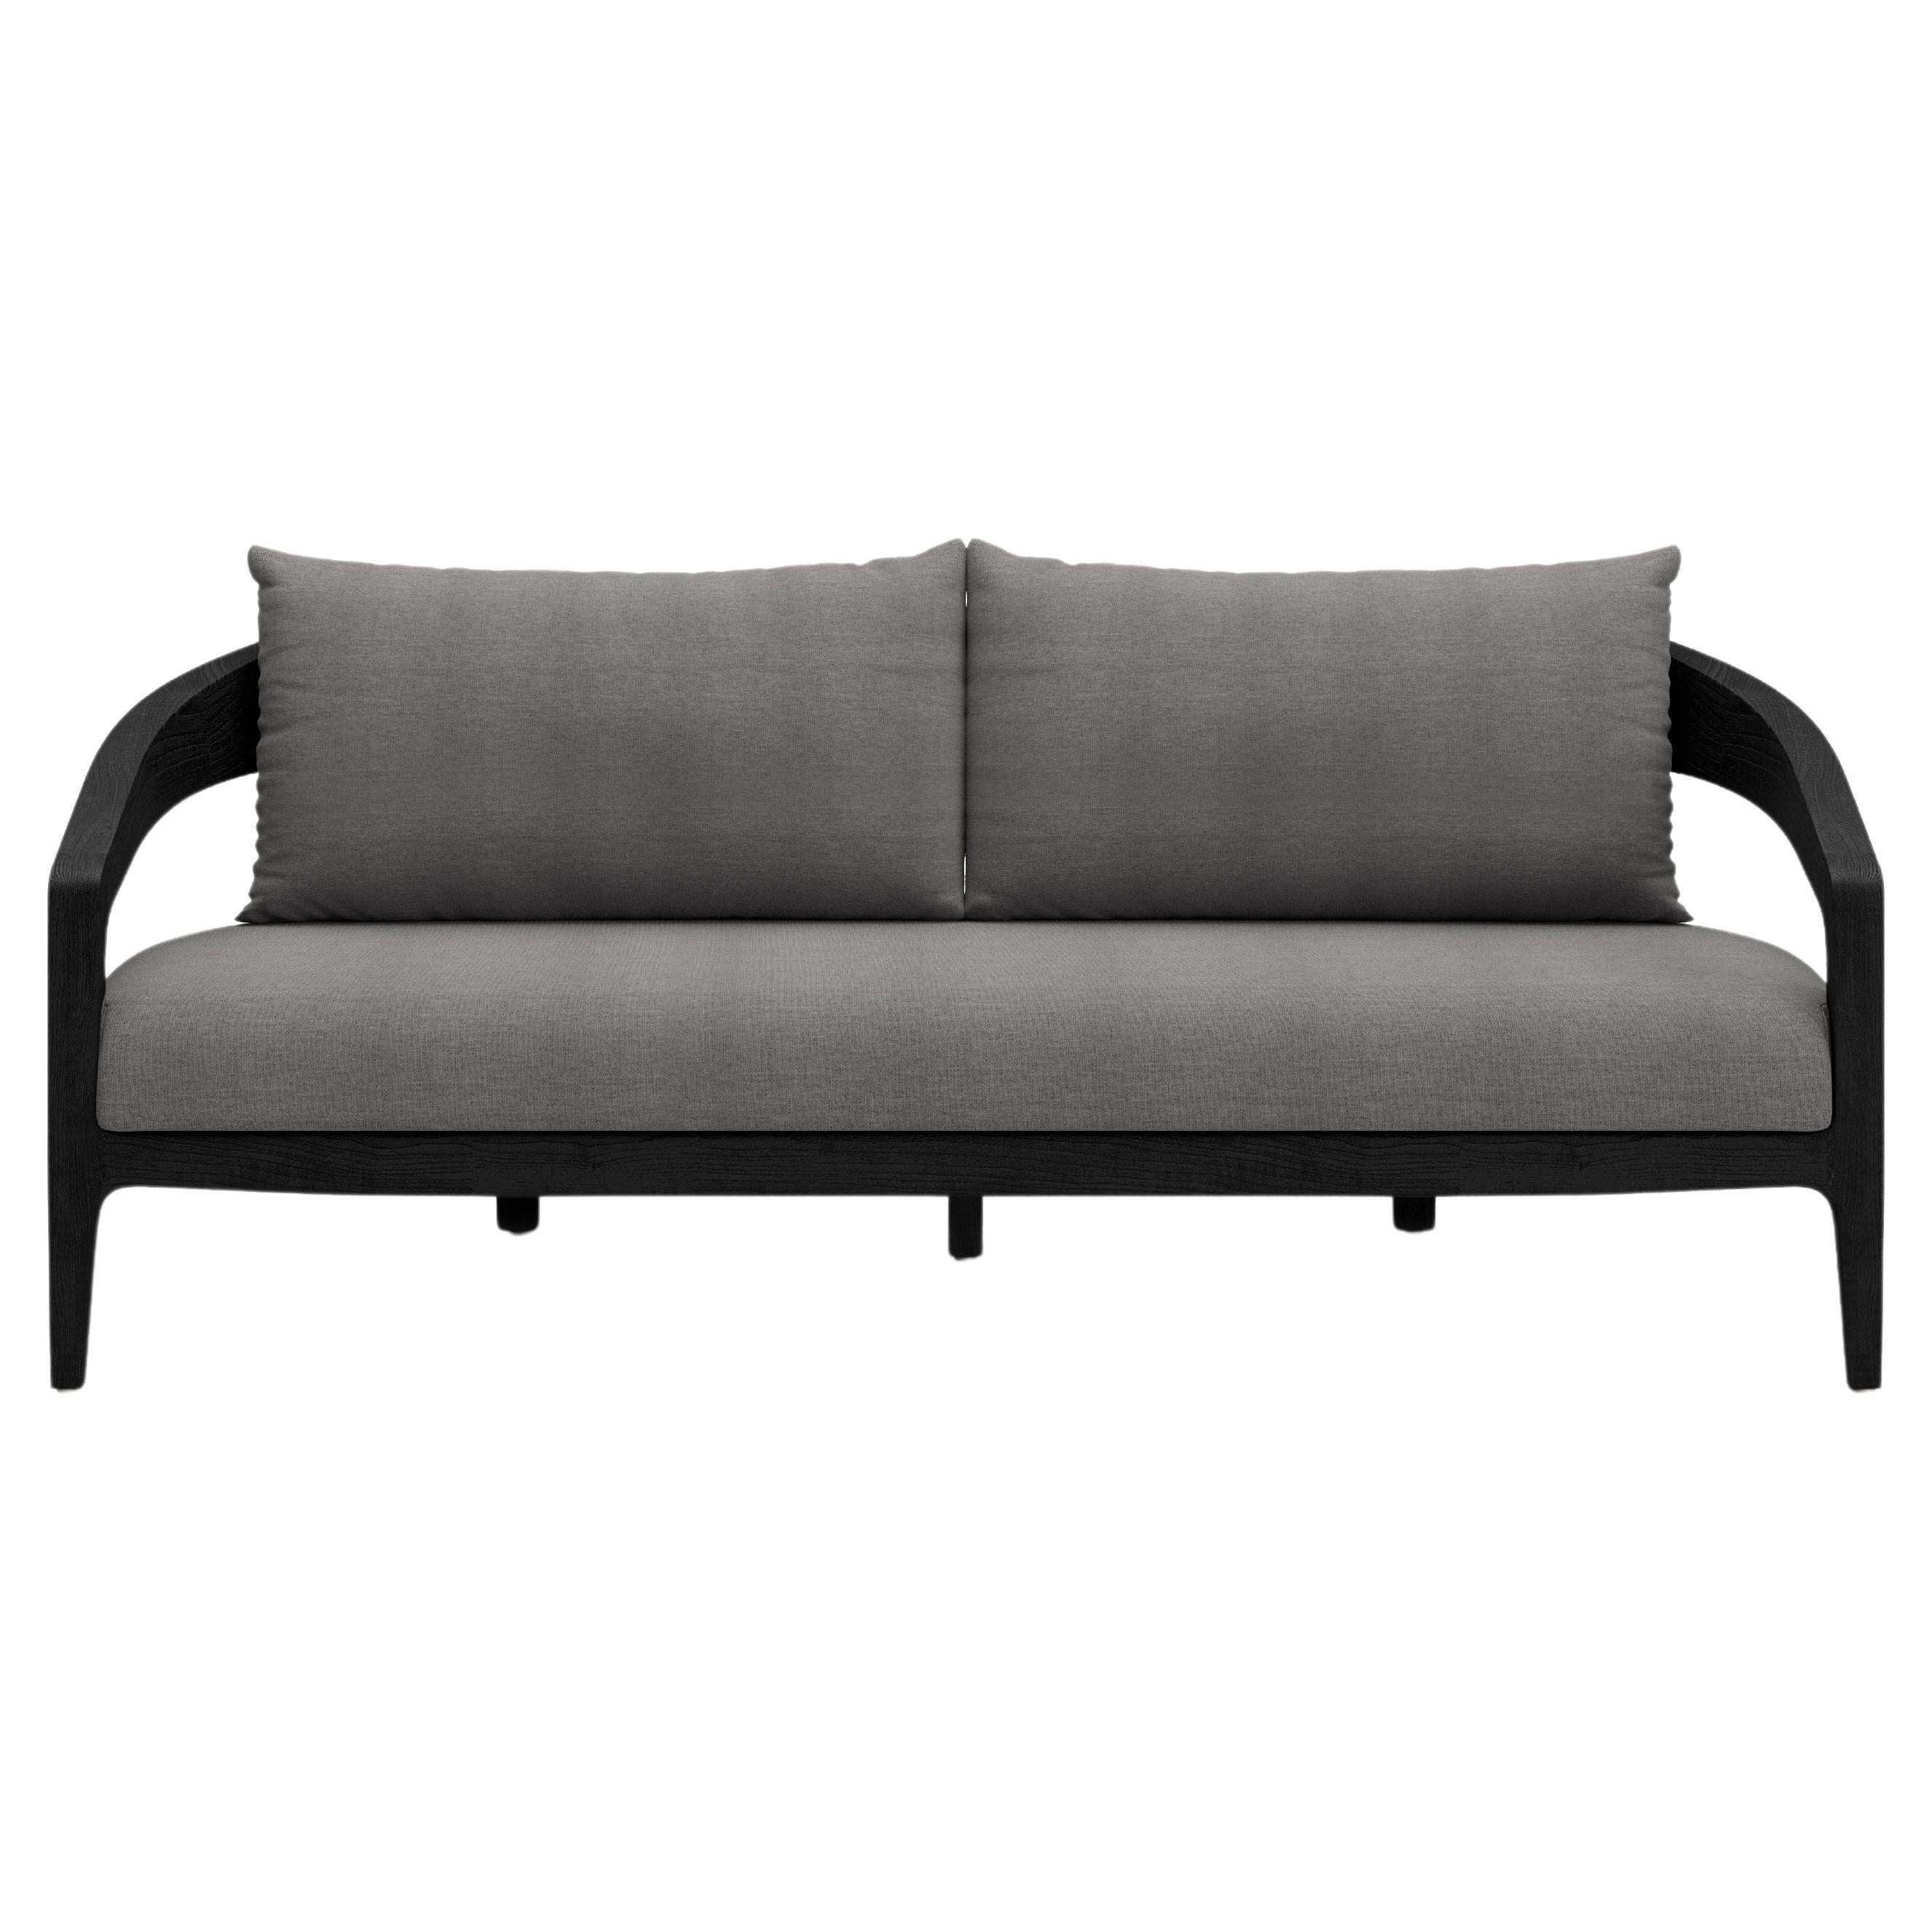 Whale-noche Outdoor 2 Seater Sofa by SNOC For Sale